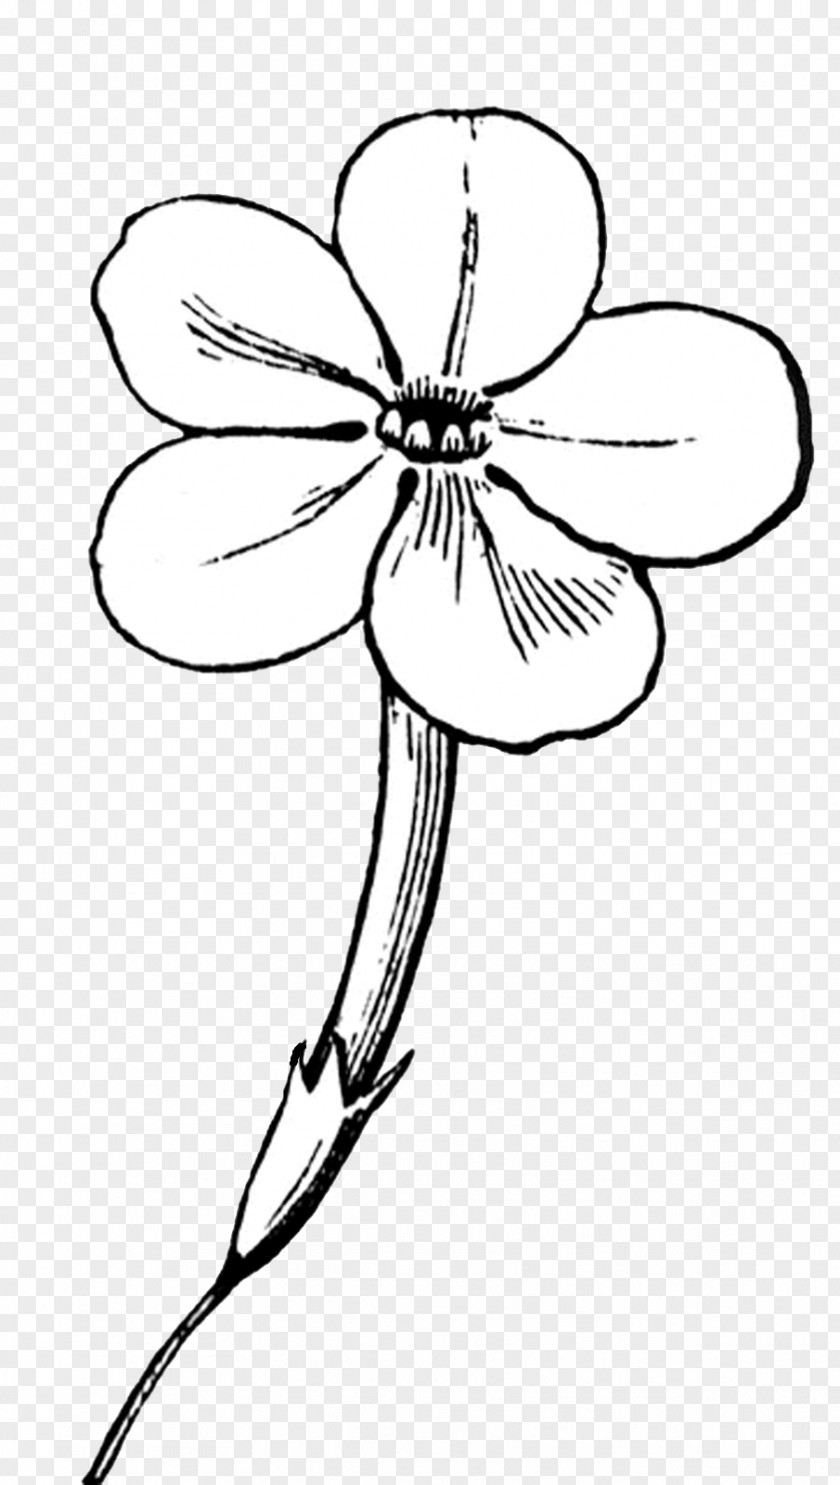 Flower Line Art Drawing Clip PNG